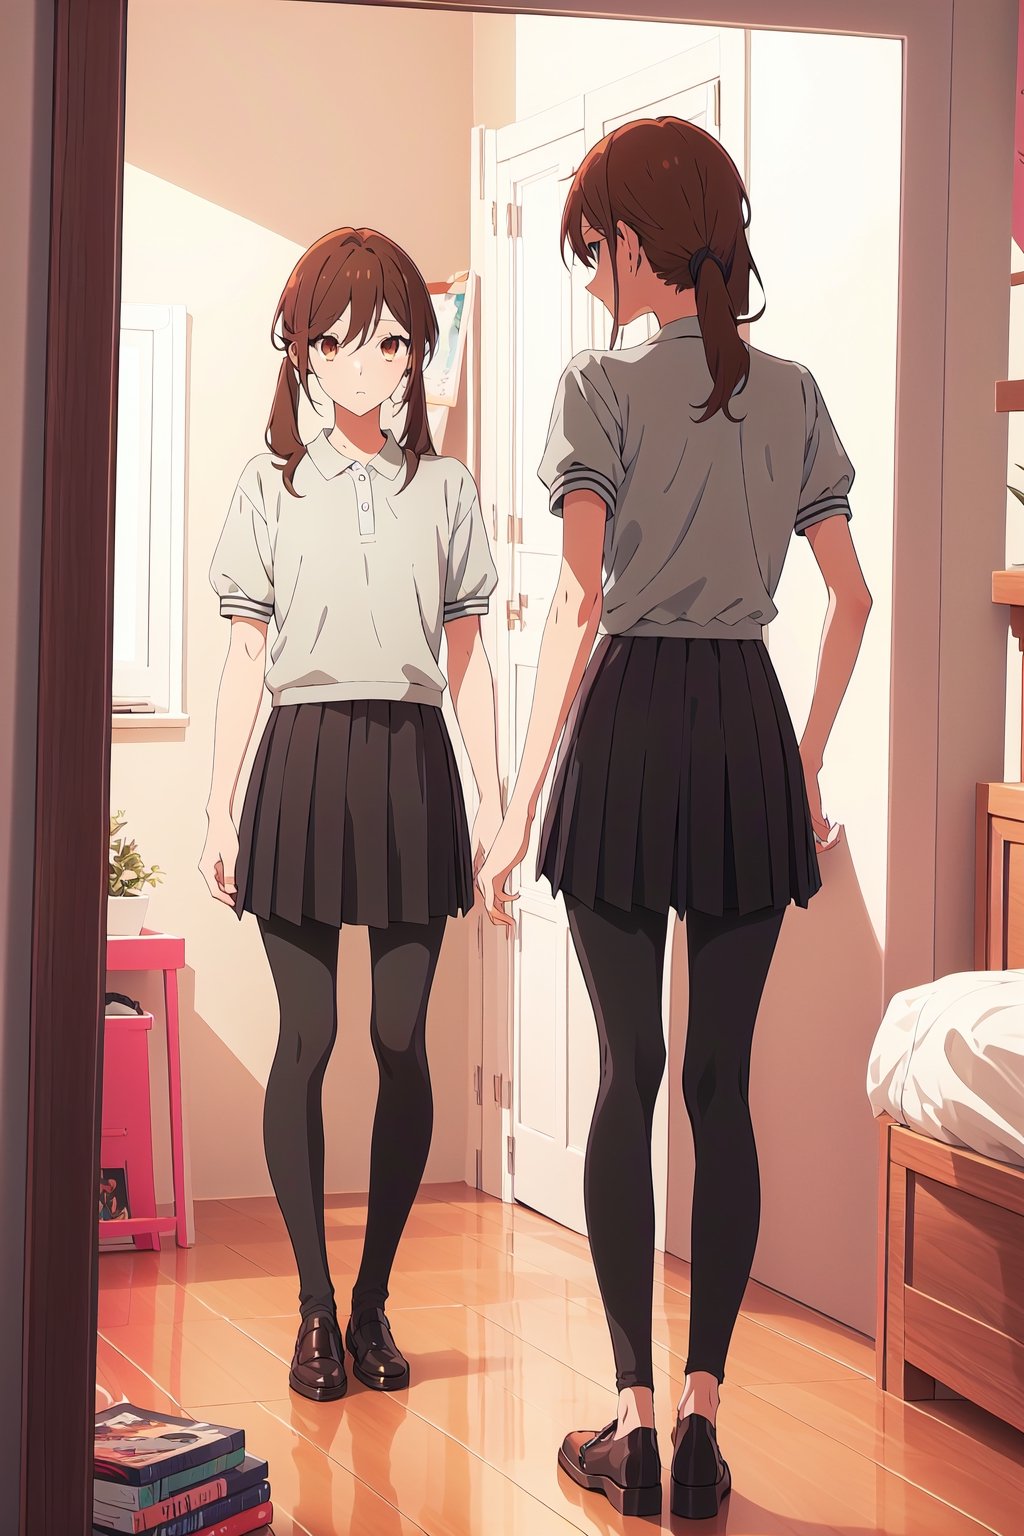 coquette aesthetic,horimiya_hori,1girl,20 years old,brown eyes,magazine cover,modeling pose, standing,foreground,dominant,polo shirt, puffed sleeves, high waist skirt,looking at herself in the mirror,arranging his clothes,leggings, putiting on makeup